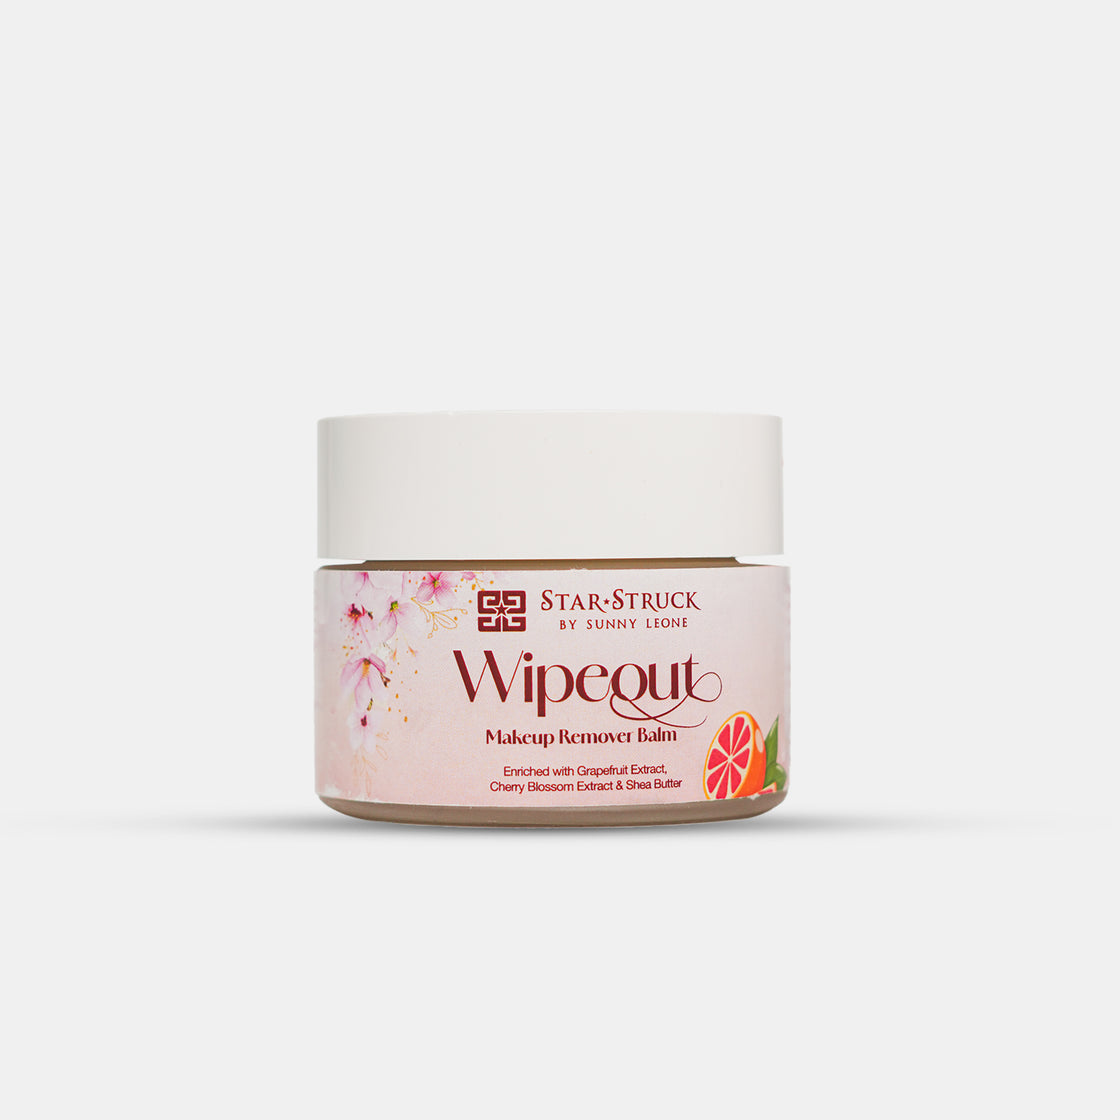 Wipeout Makeup Remover Balm-makeup remover-cruelty free cosmetics-Sunny Leone